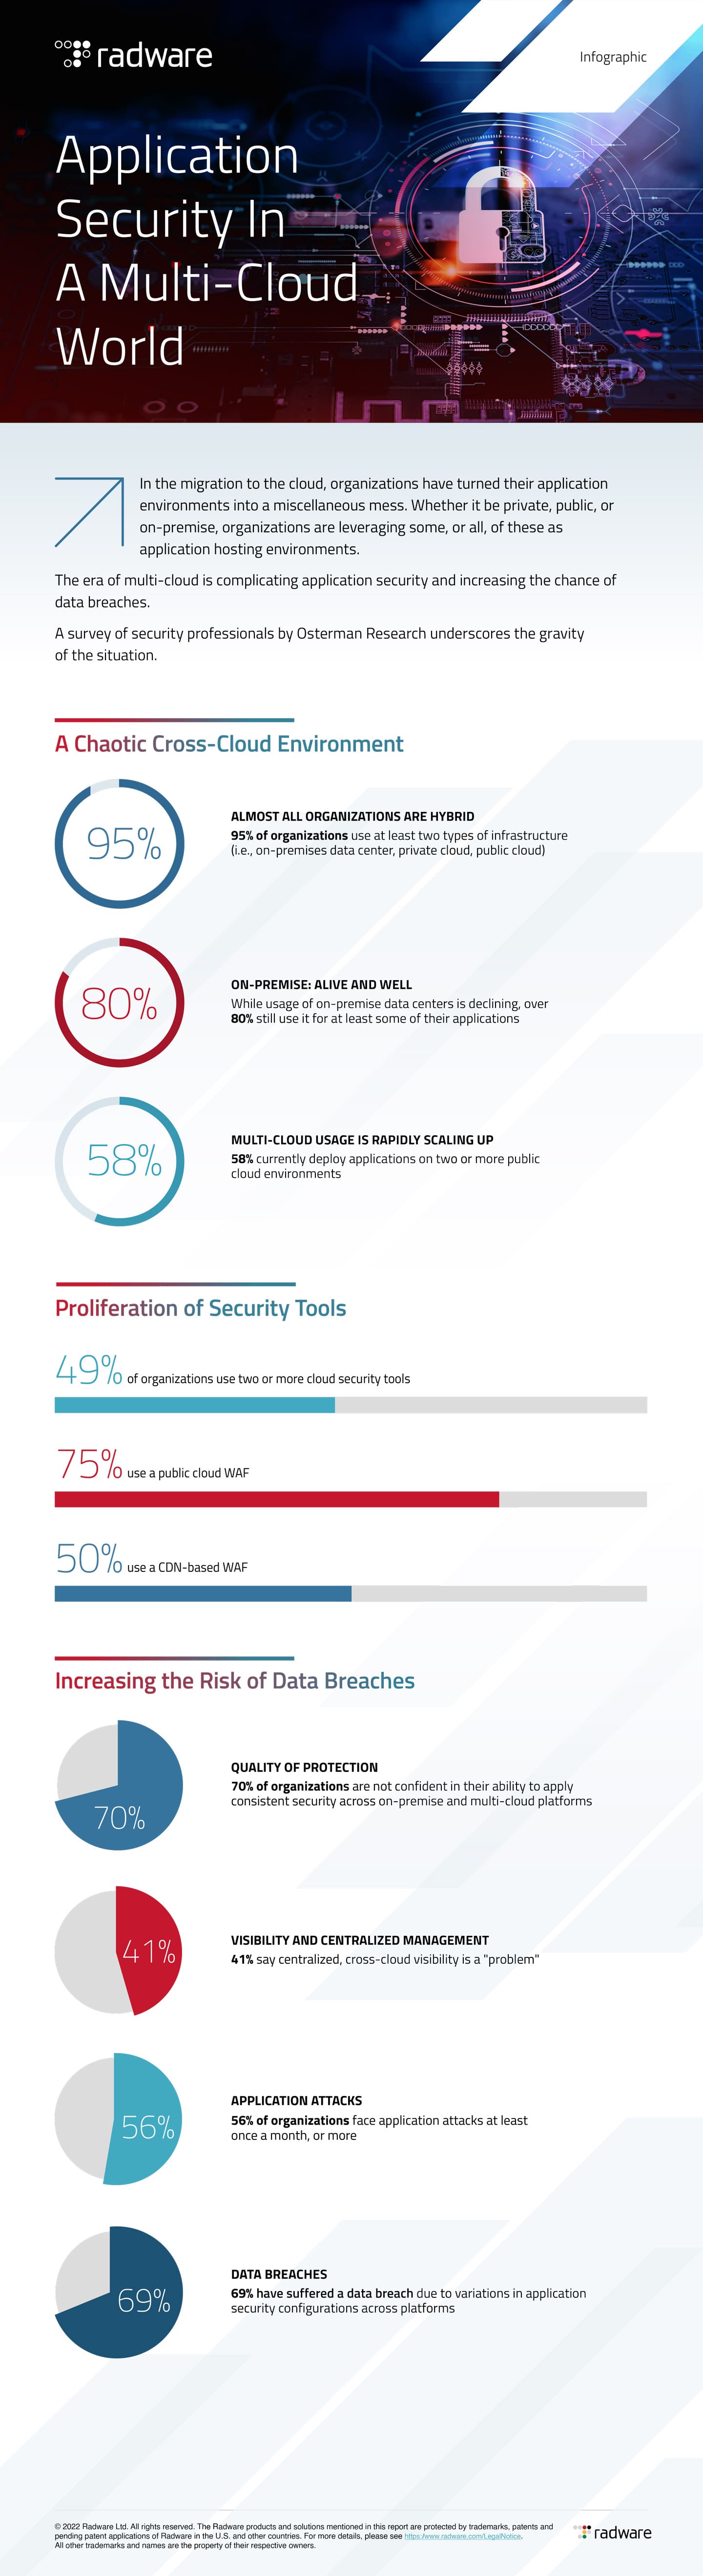 Application Security In A Multi-Cloud World Infographic